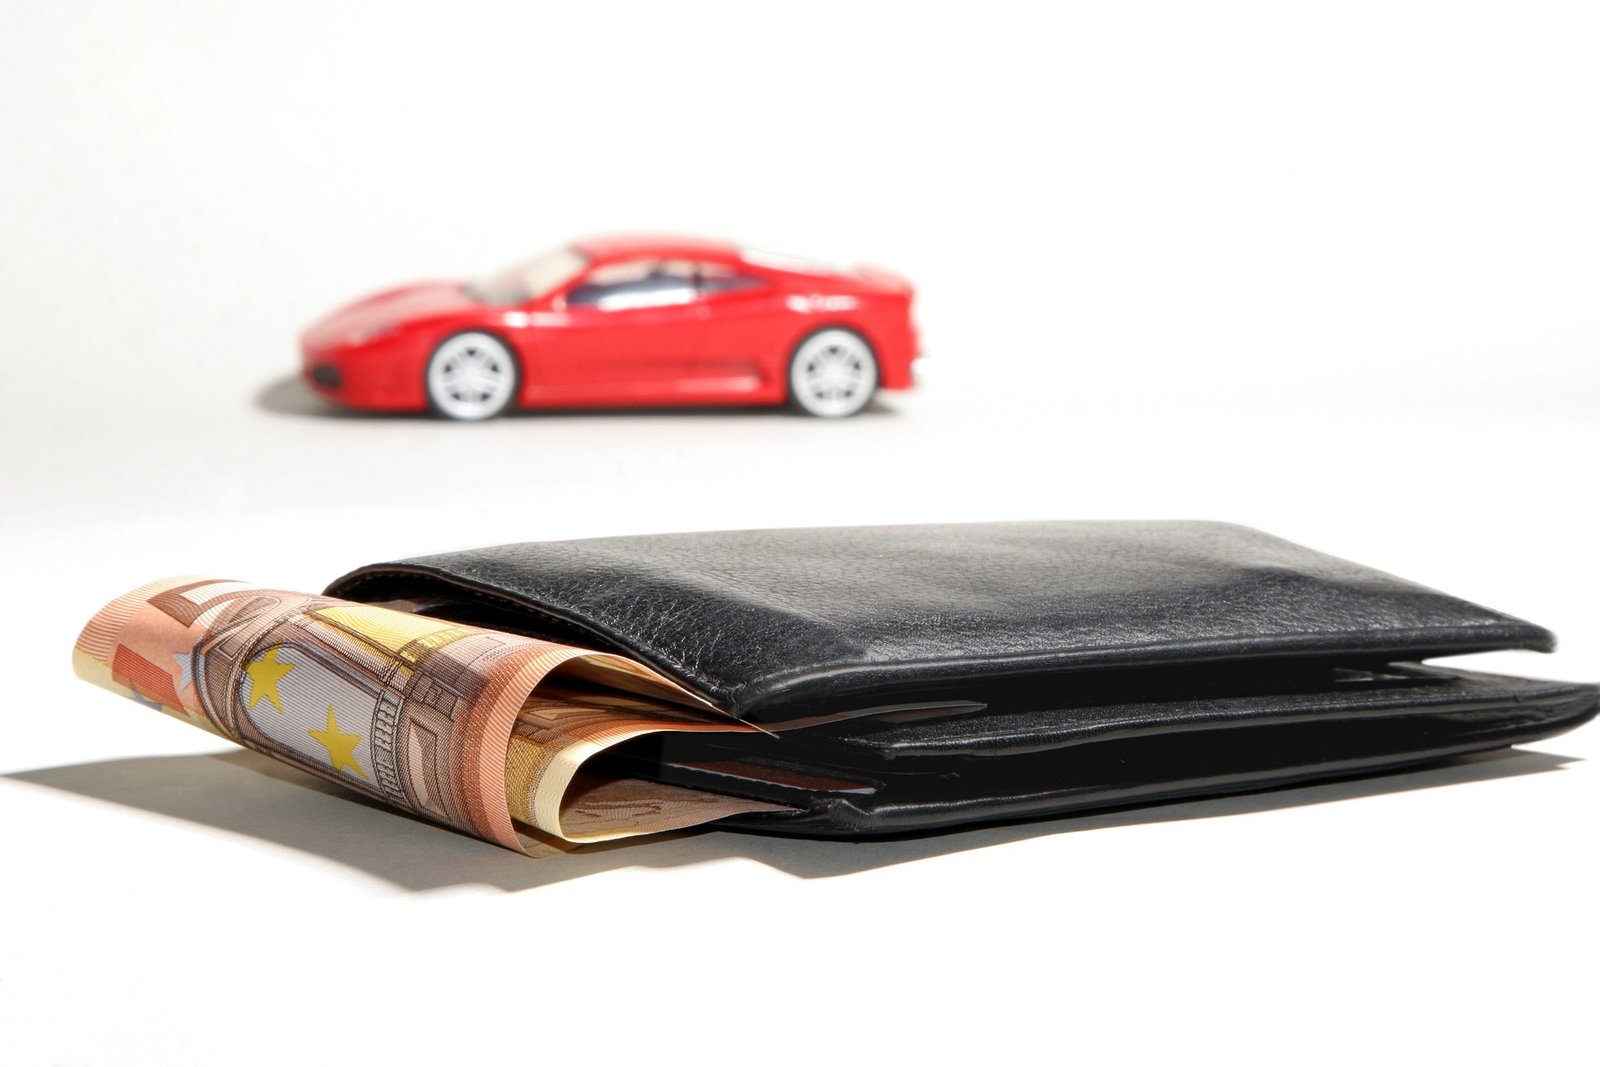 Essential Things To Know Before Applying For A Car Loan.